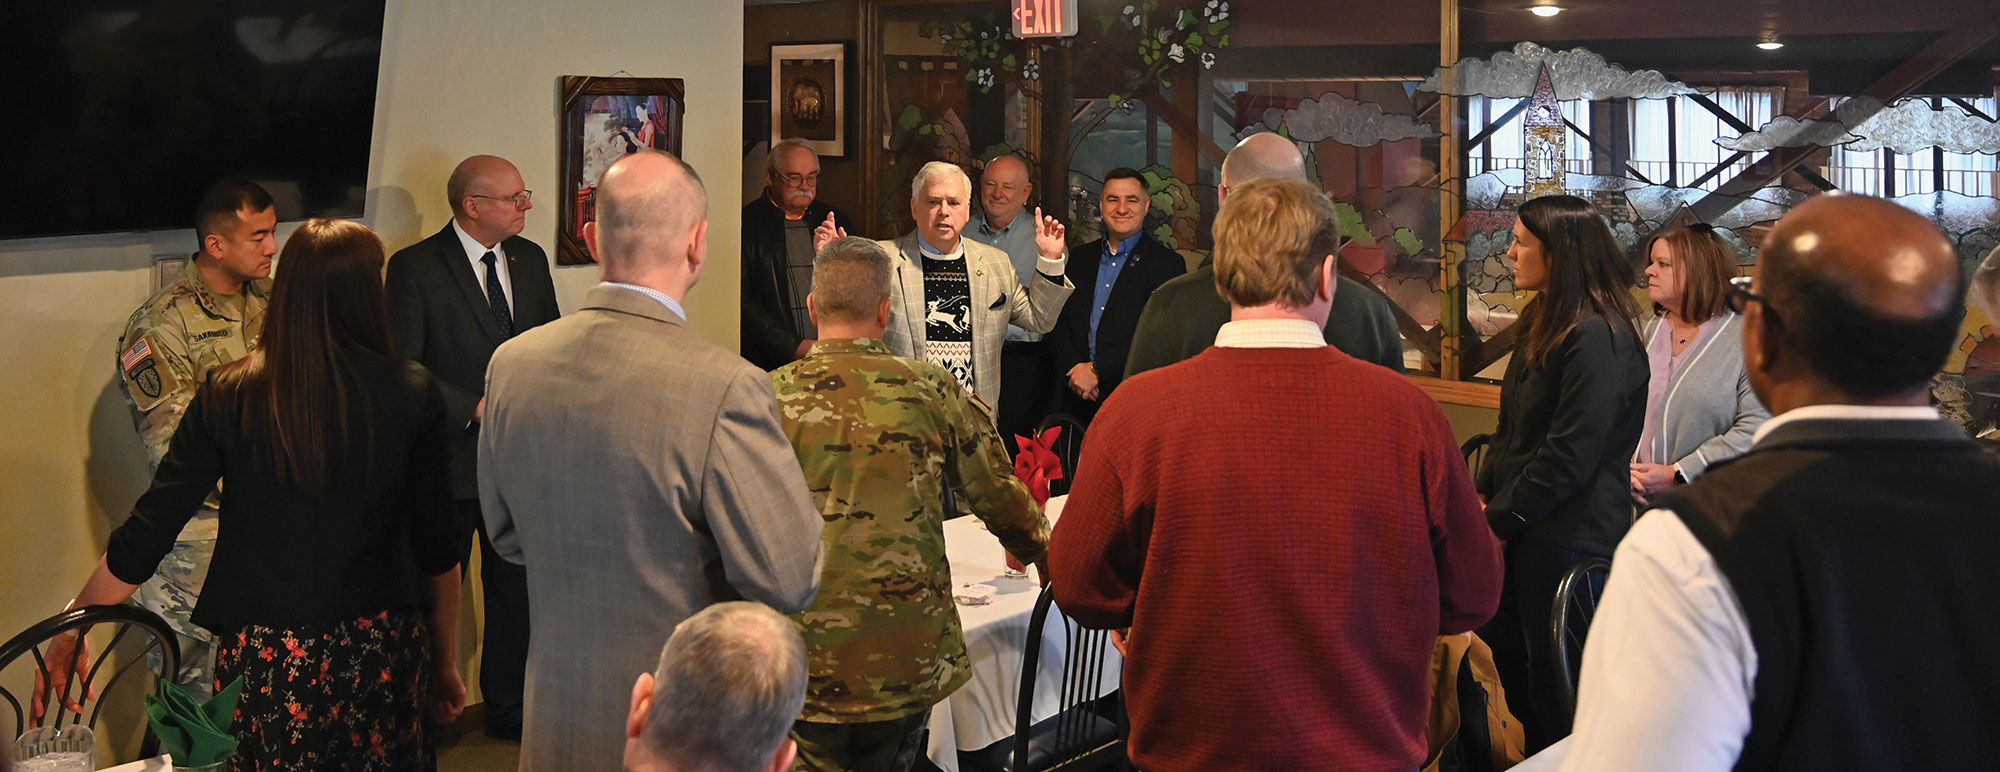 CGSC Foundation President/CEO Rod Cox welcomes guests at the Friends of the Foundation Holiday Luncheon Dec. 16, 2022, at the Baan Thai restaurant in downtown Leavenworth, Kansas.